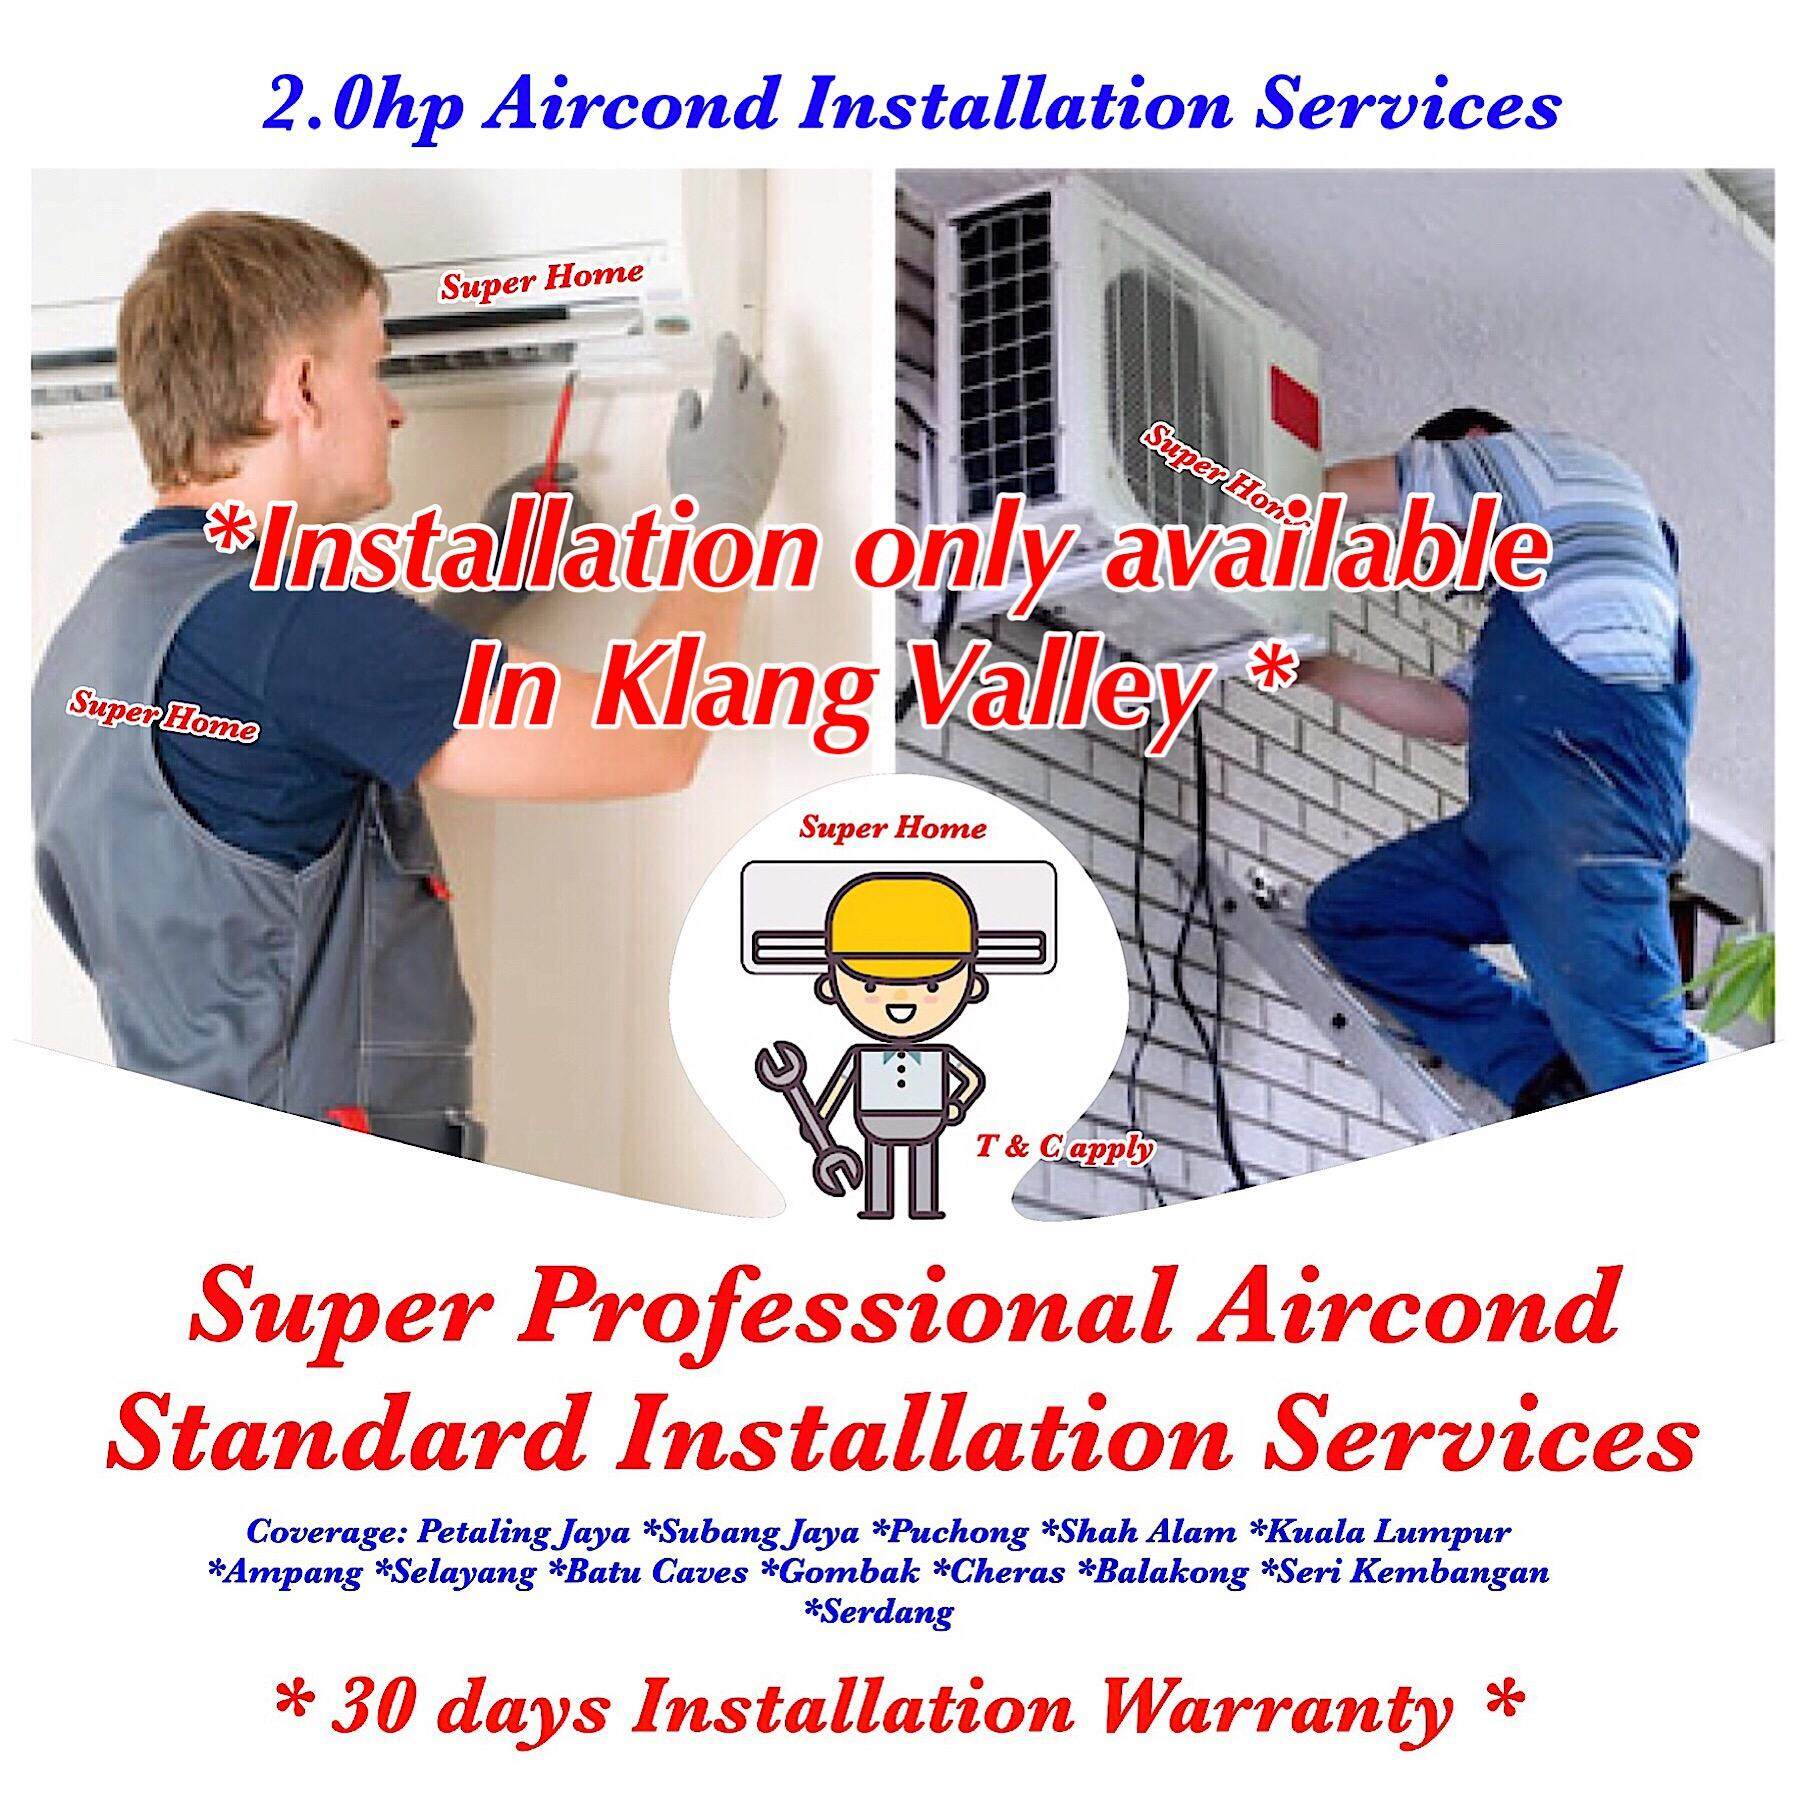 Super Professional 2.0hp Aircond Installation Services (Wall Split) - Standard Installation Services with in 10ft Copper Piping